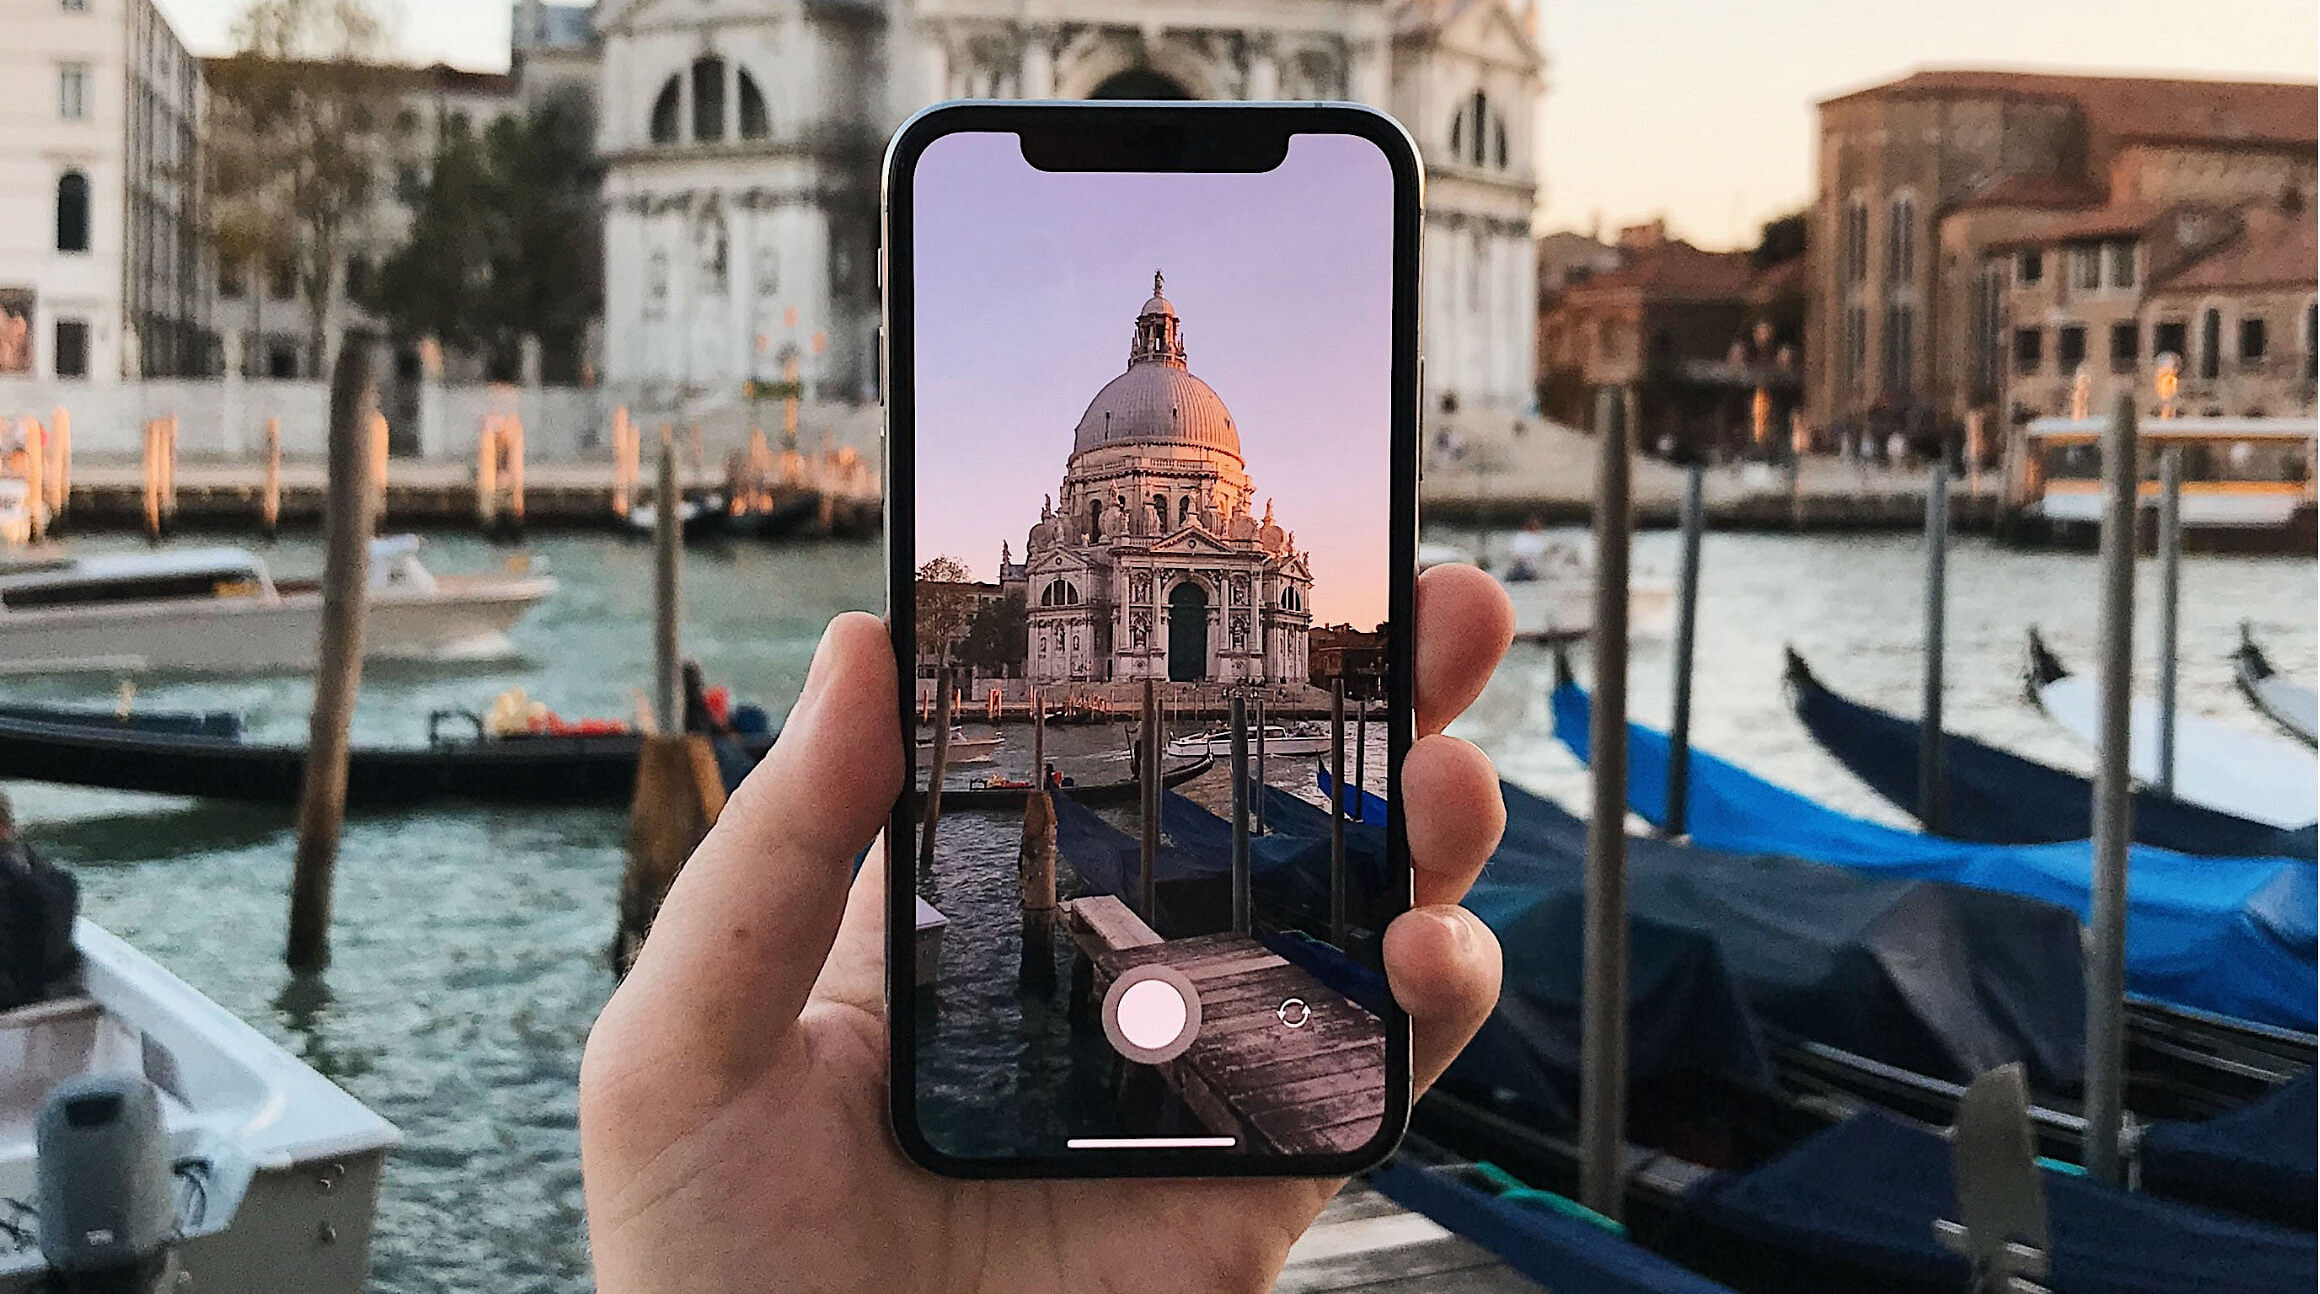 Taking a photo of Venice on smartphone